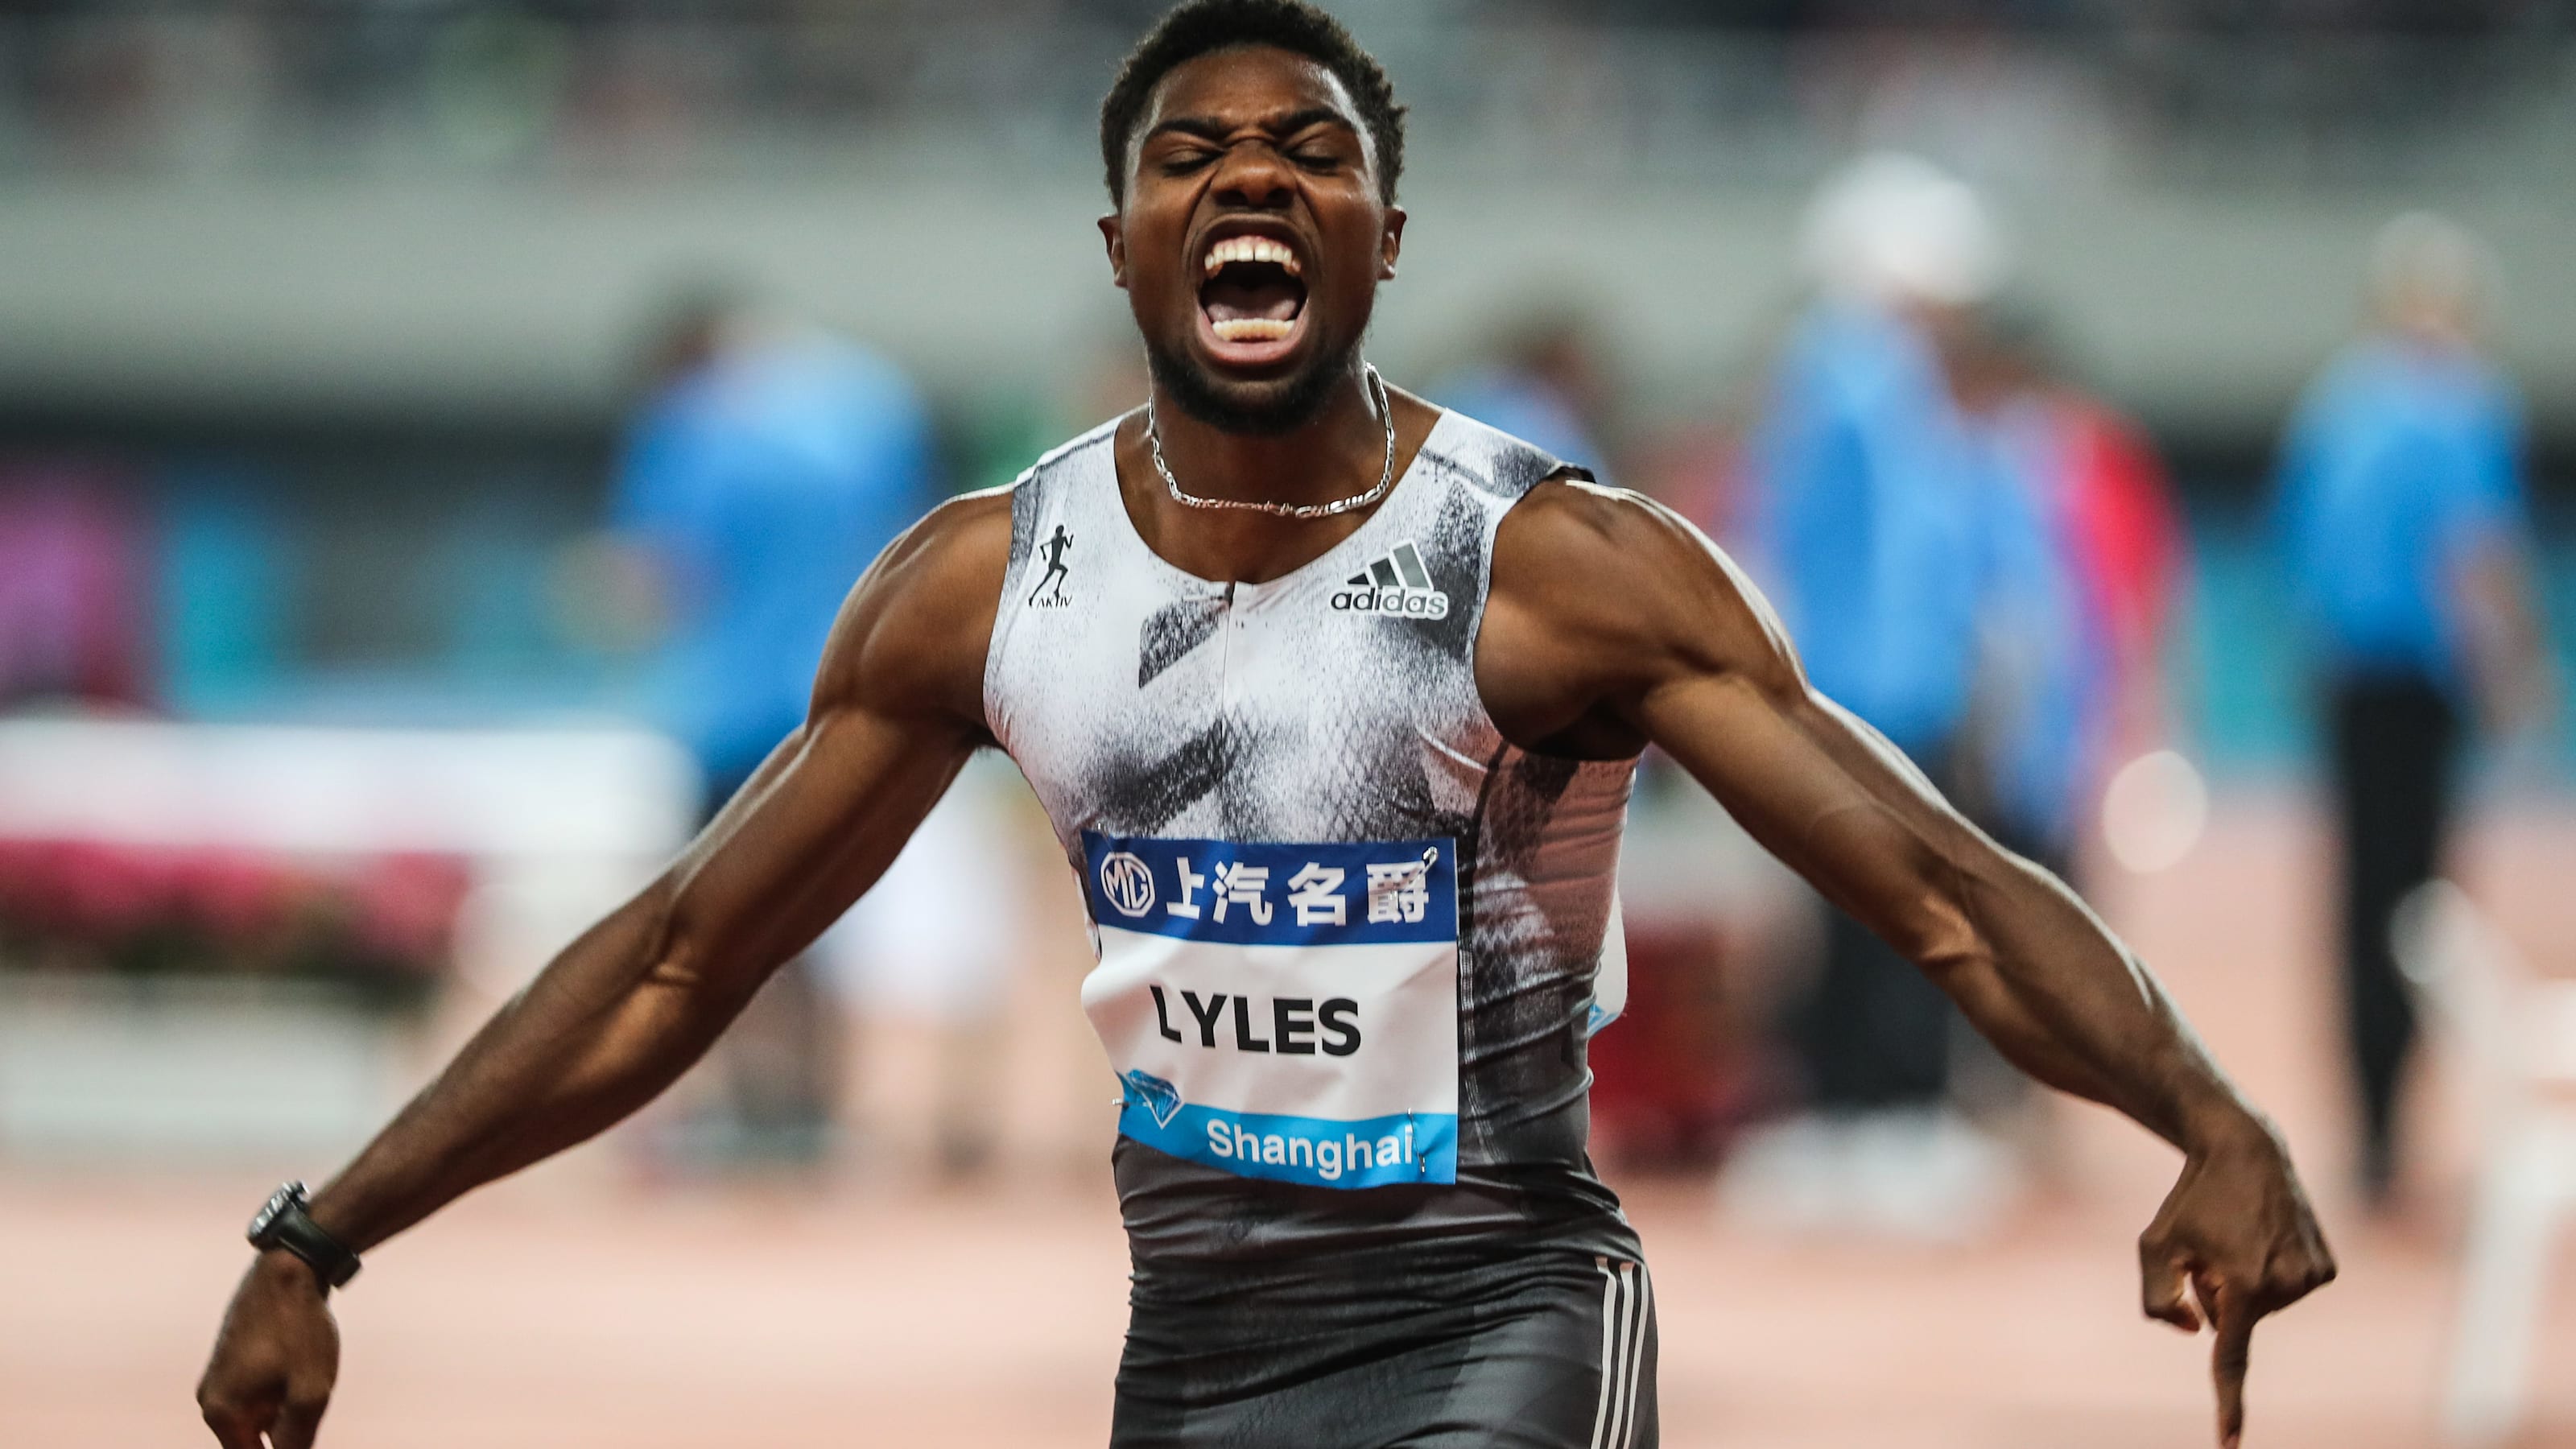 India World Athletics Day 7 live: All eyes on Neeraj Chopra in javelin throw as Shelly-Ann Fraser Pryce and Noah Lyles target gold in 200m final, three Indians to feature in triple jump, follow World Athletics Championship live